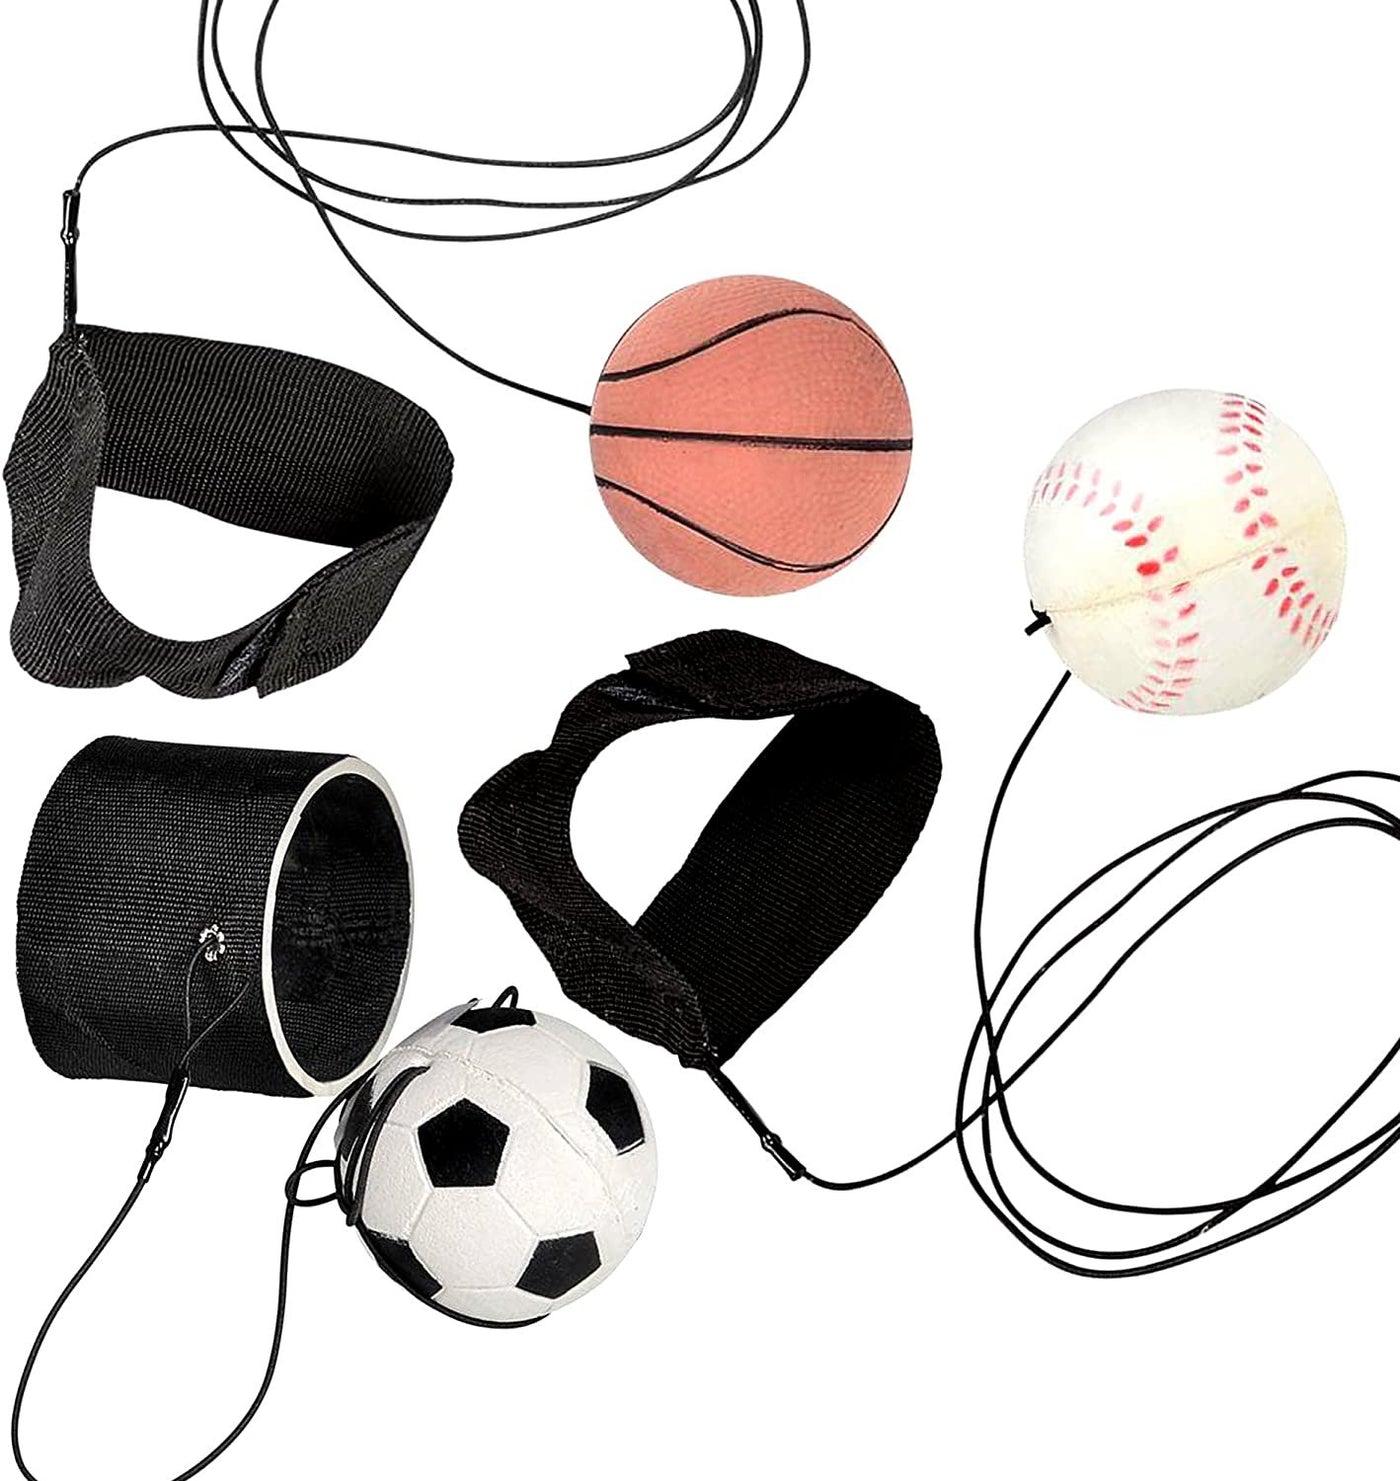 2.25" Sports Wrist Balls - Set of 3 - Includes Basketball, Baseball, and Soccer Ball Wristband Toys - Durable Foam String Attached Rebound Balls - Party Favor, Gift Idea for Kids